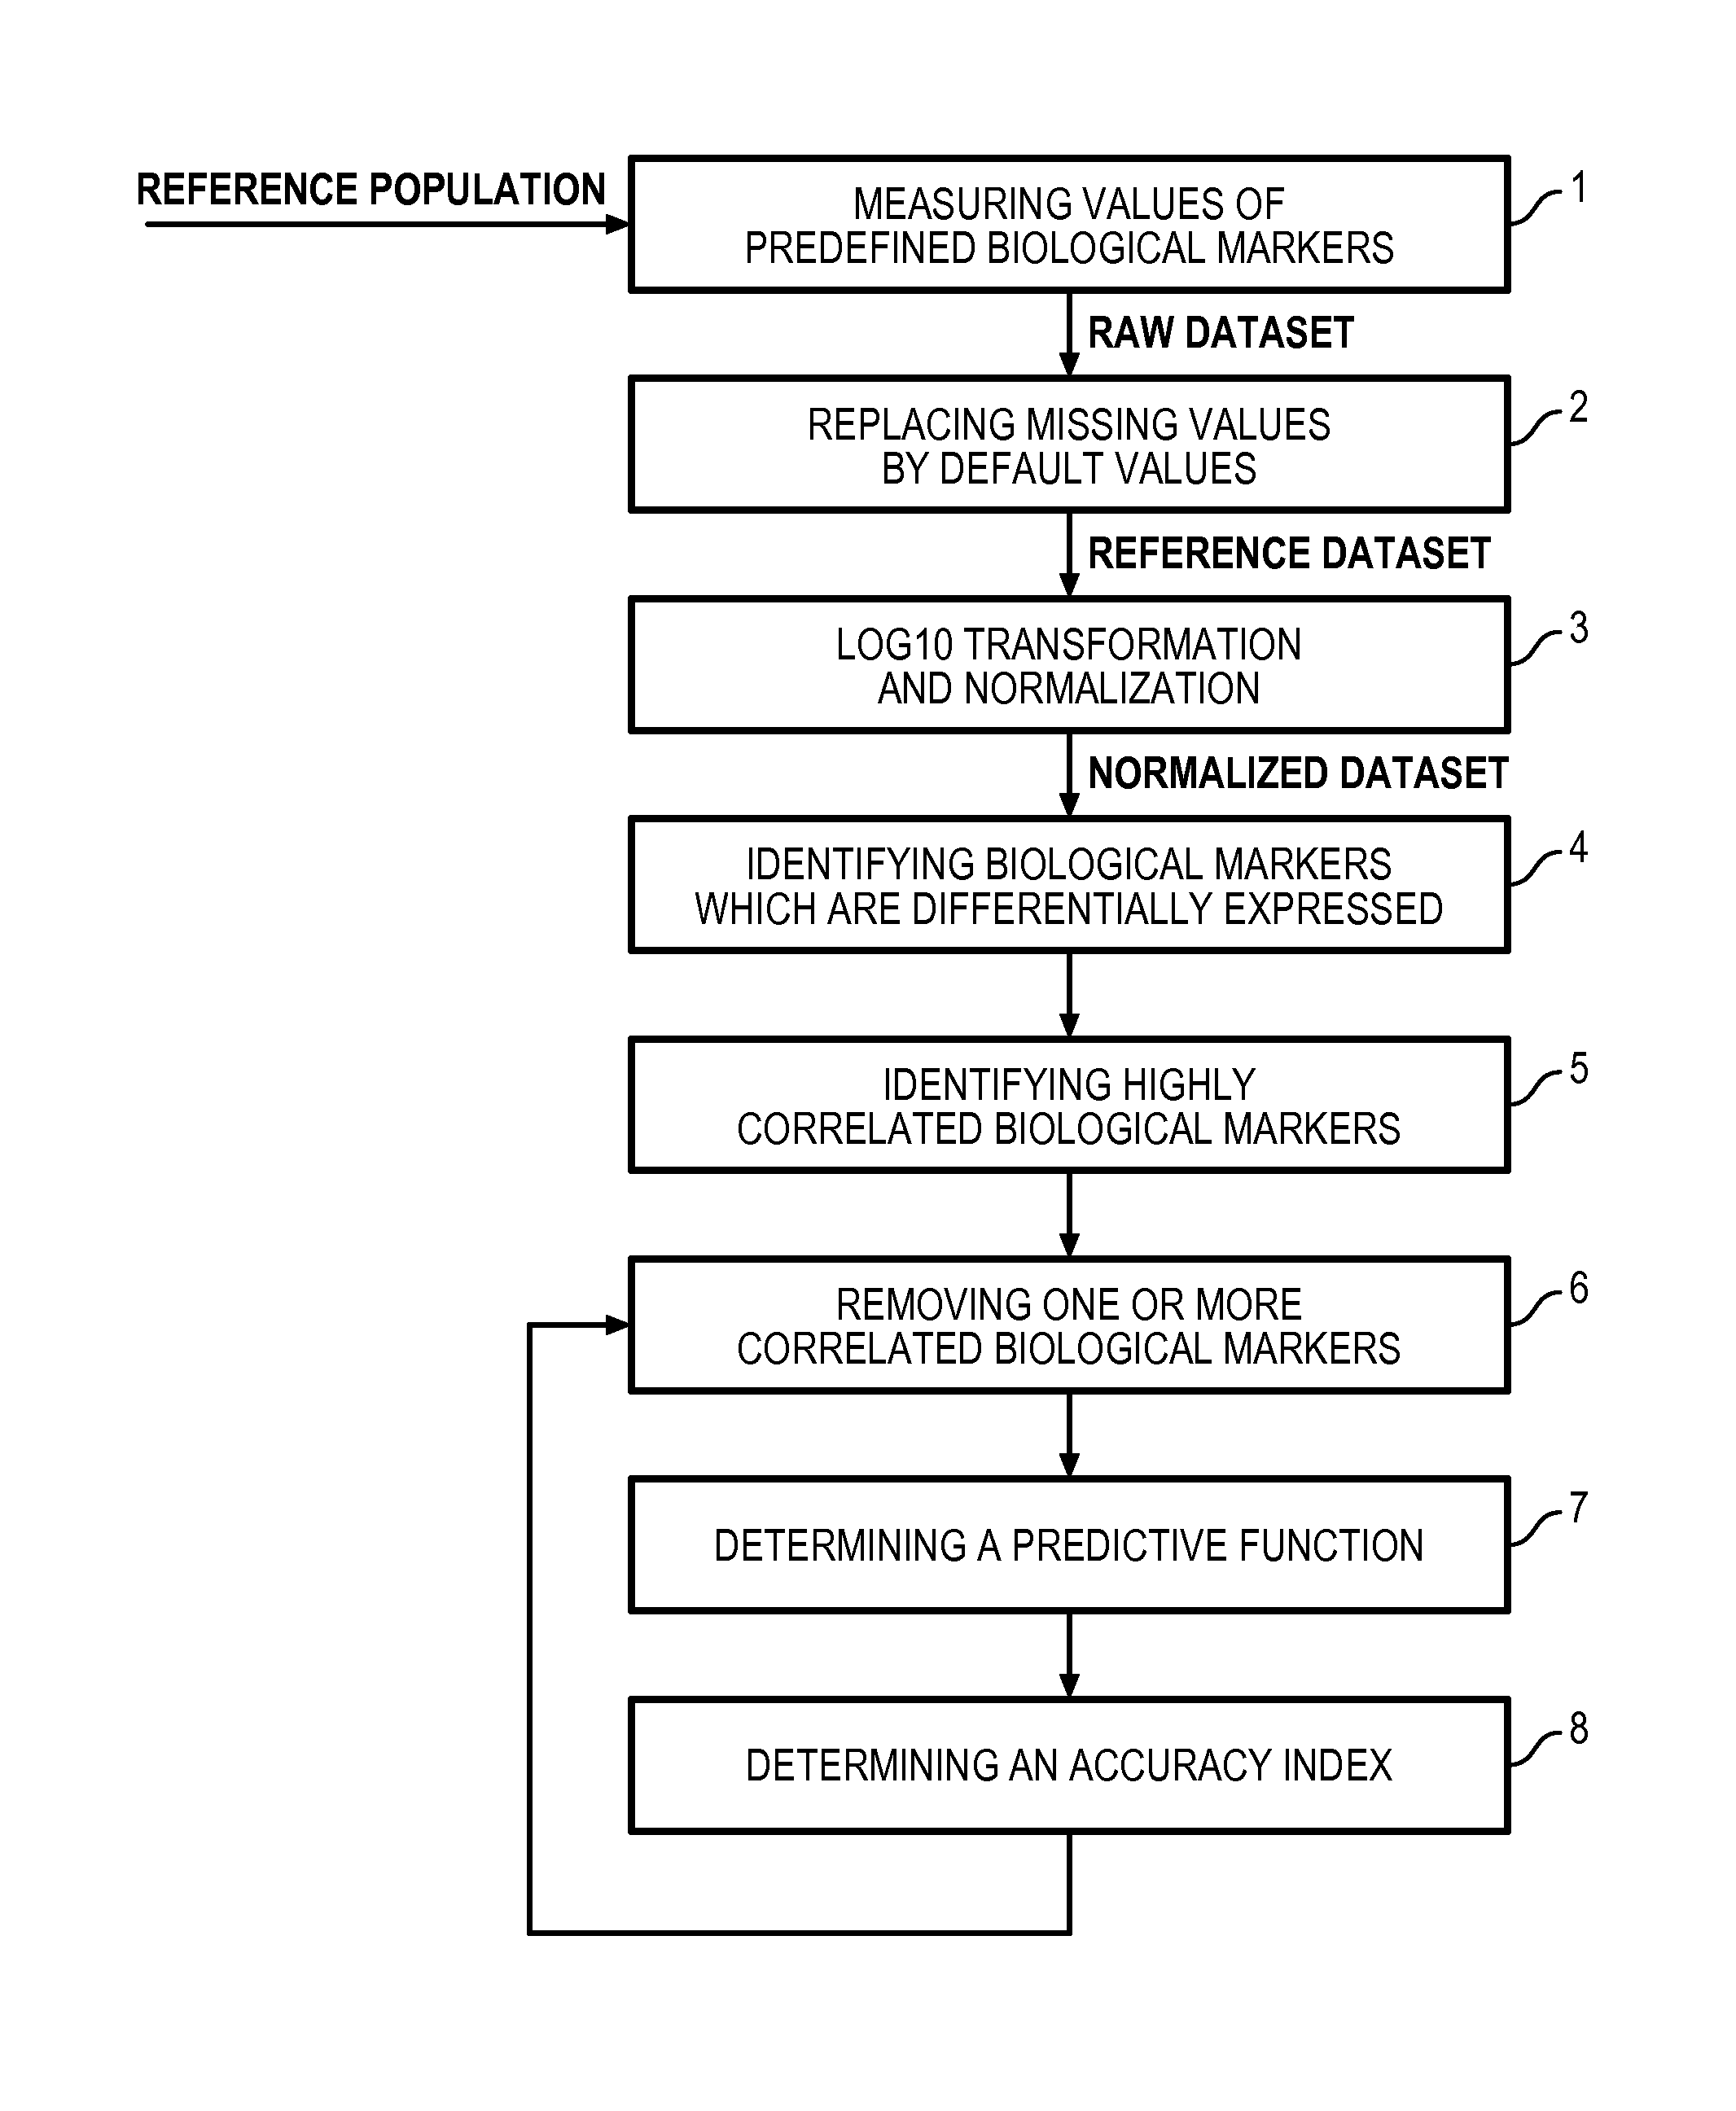 Method for determining a predictive function for discriminating patients according to their disease activity status